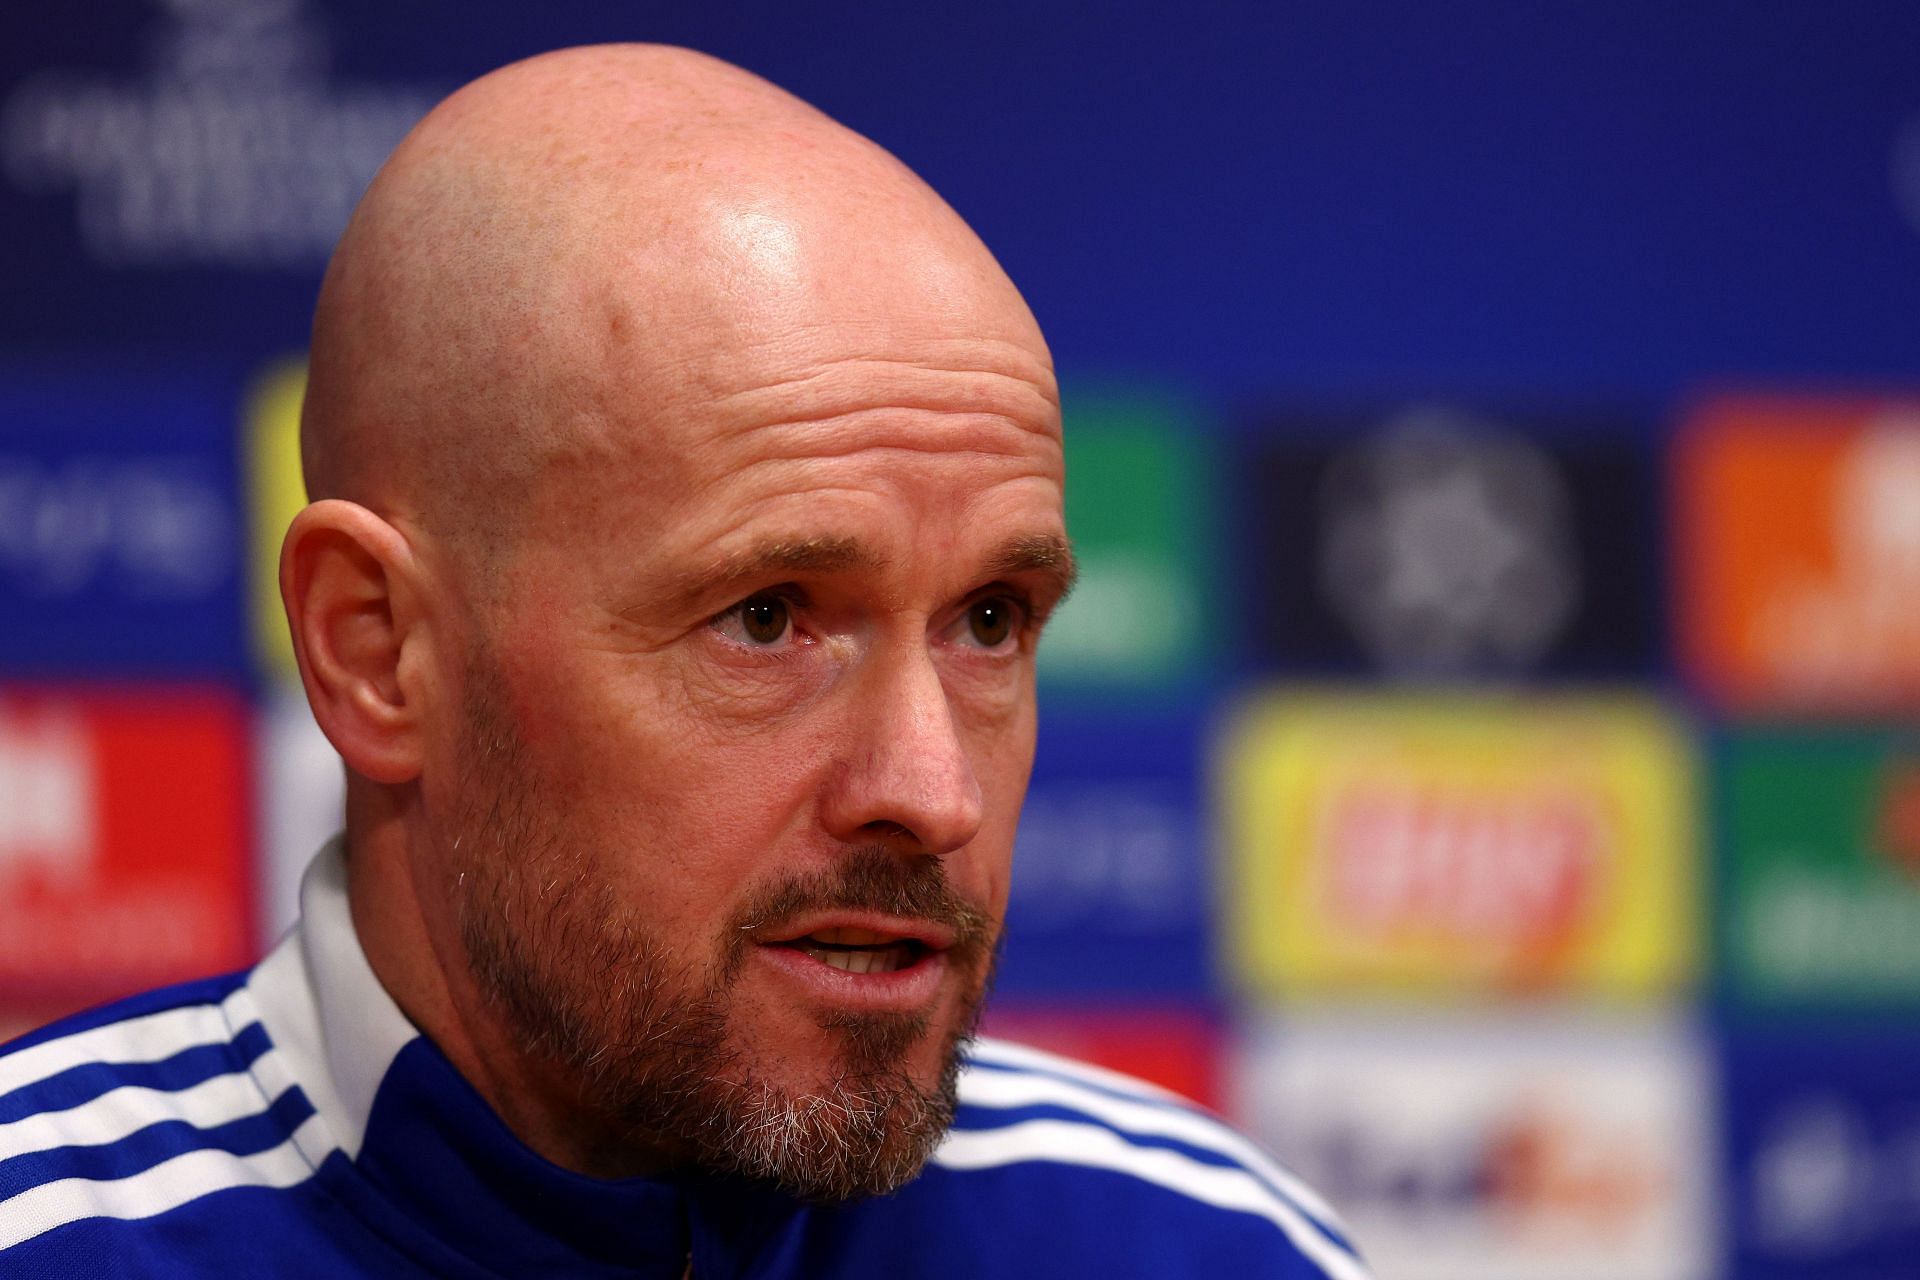 Erik ten Hag is all set to take charge at Old Trafford.